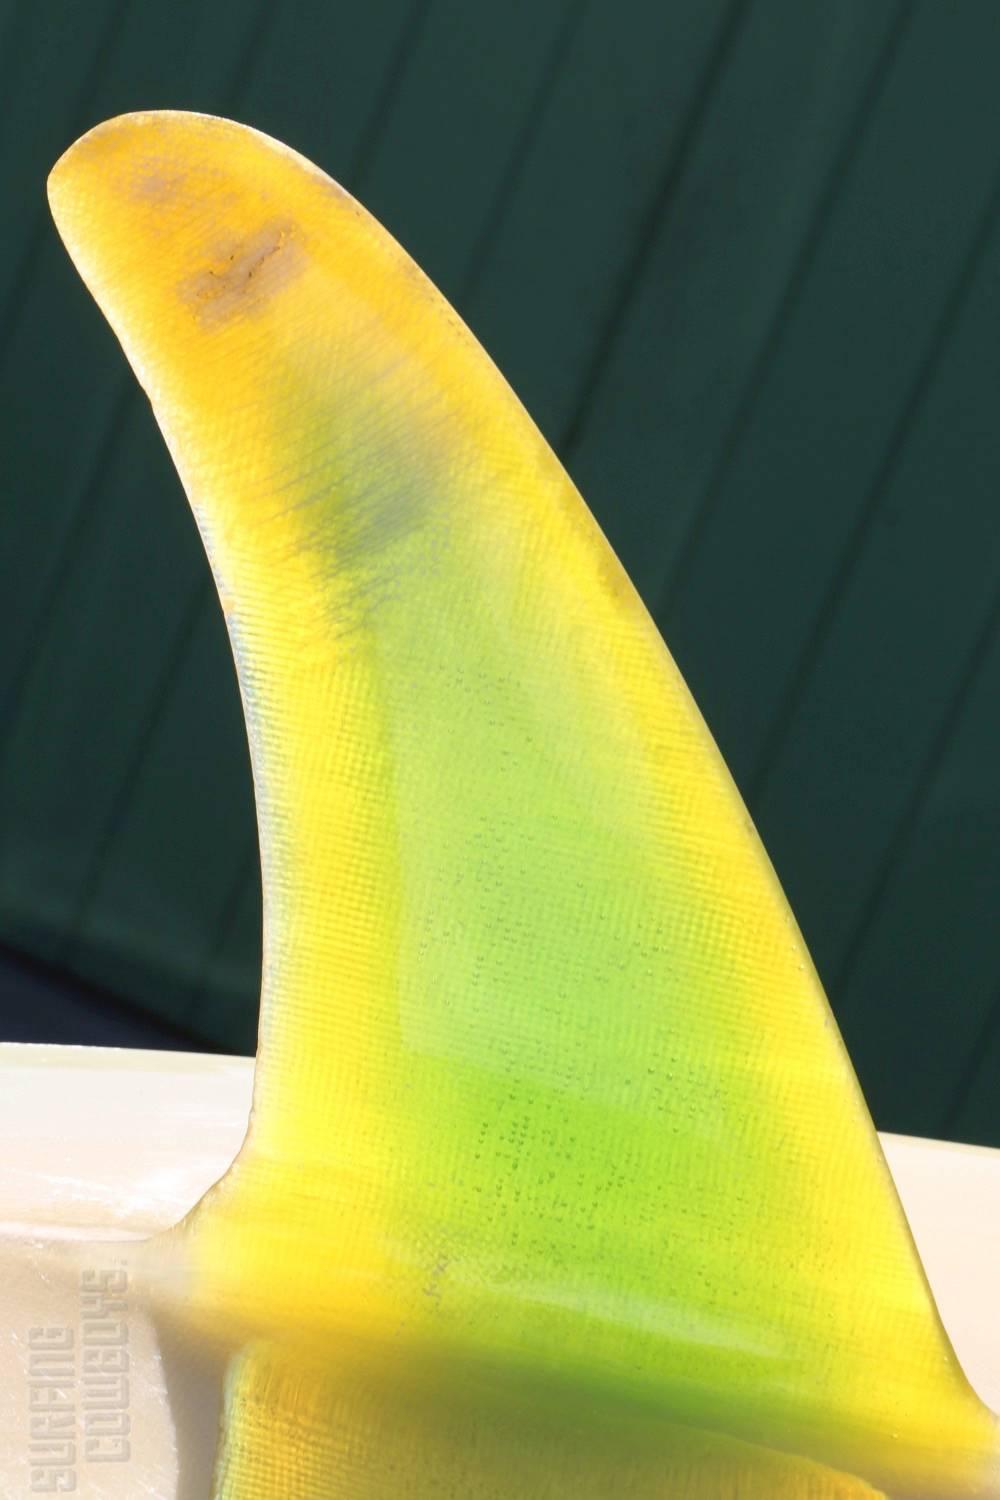 Rare Bing Foil Surfboard with Hawaii logo and glassed-in fin. This is a glorious surfboard in beautiful, all original condition. Clear deck, lime green striping on rails, stunning green logo which displays well and the most wonderful translucent